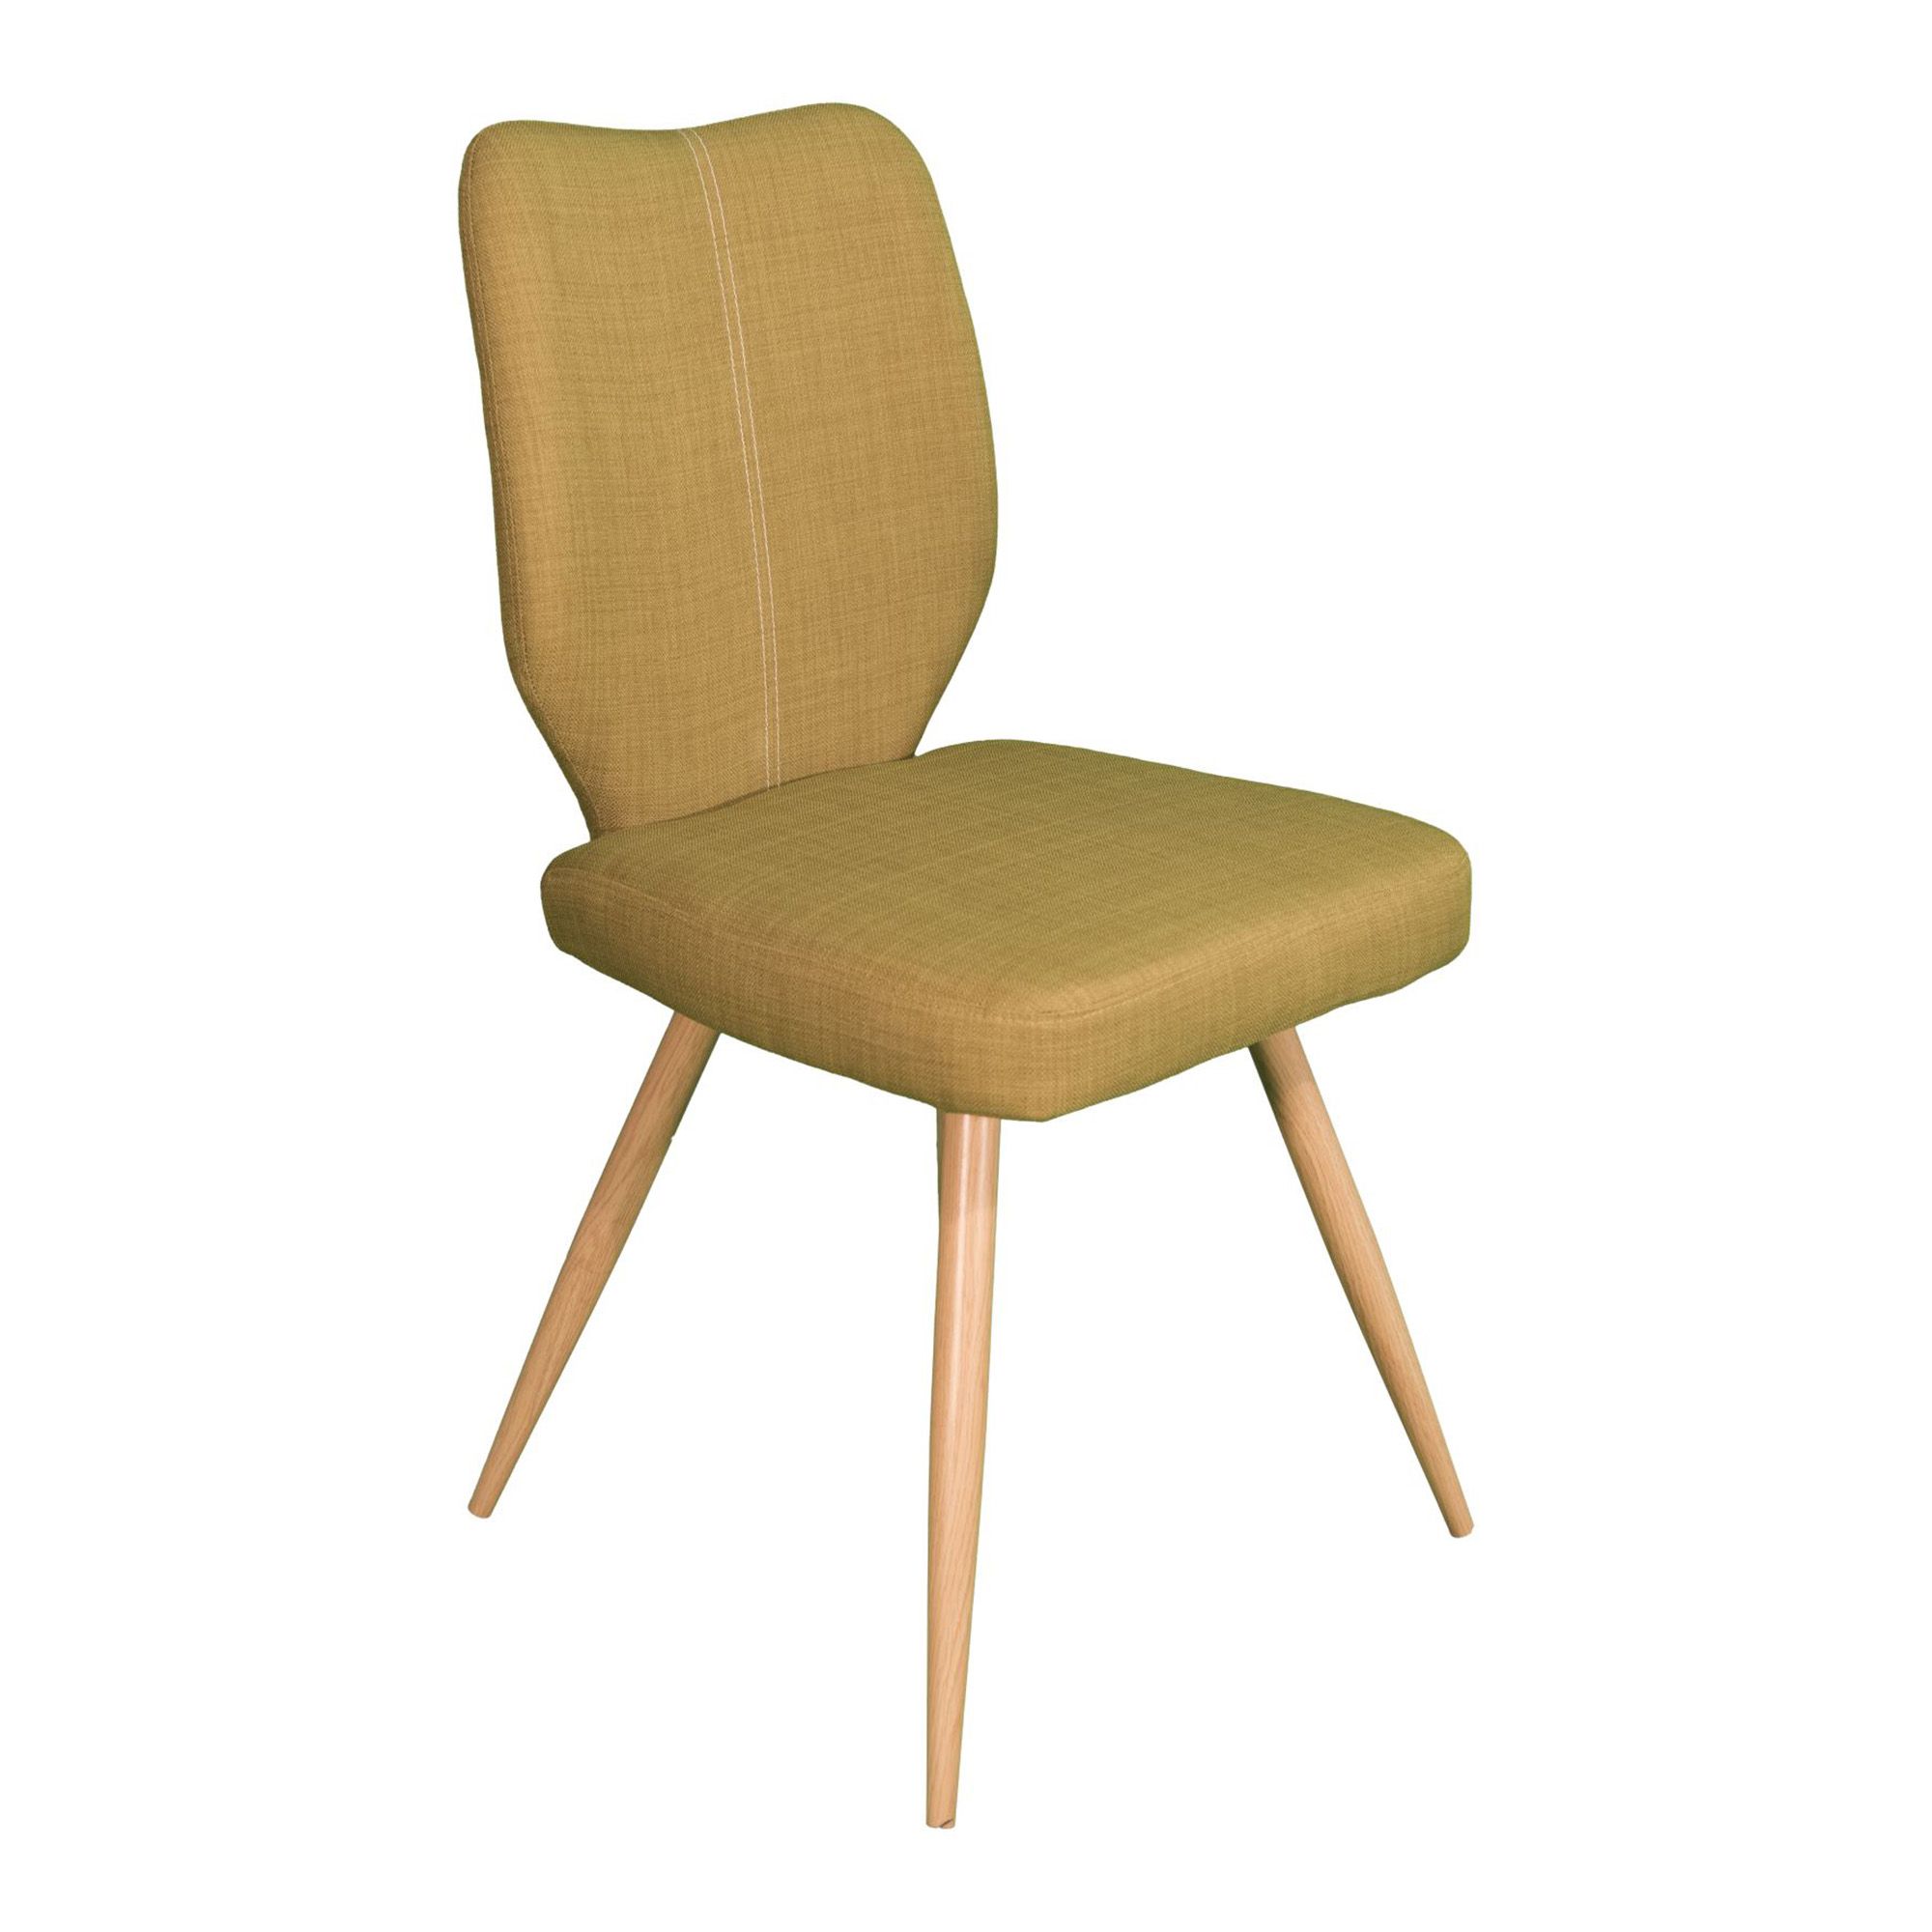 Pirin Dining Chair Fabric Green - Dining Chairs - Meubles